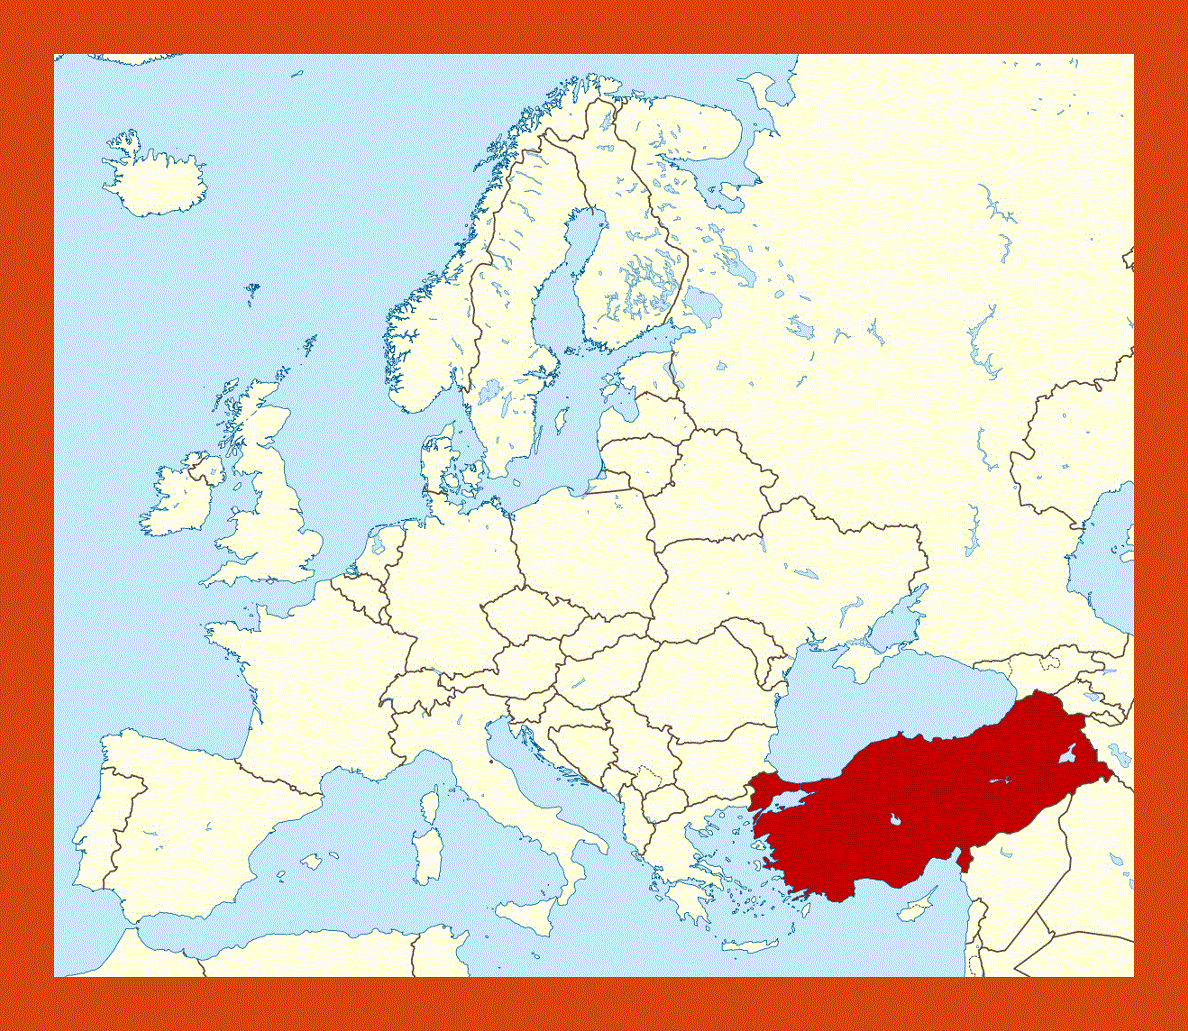 Location map of Turkey in Europe